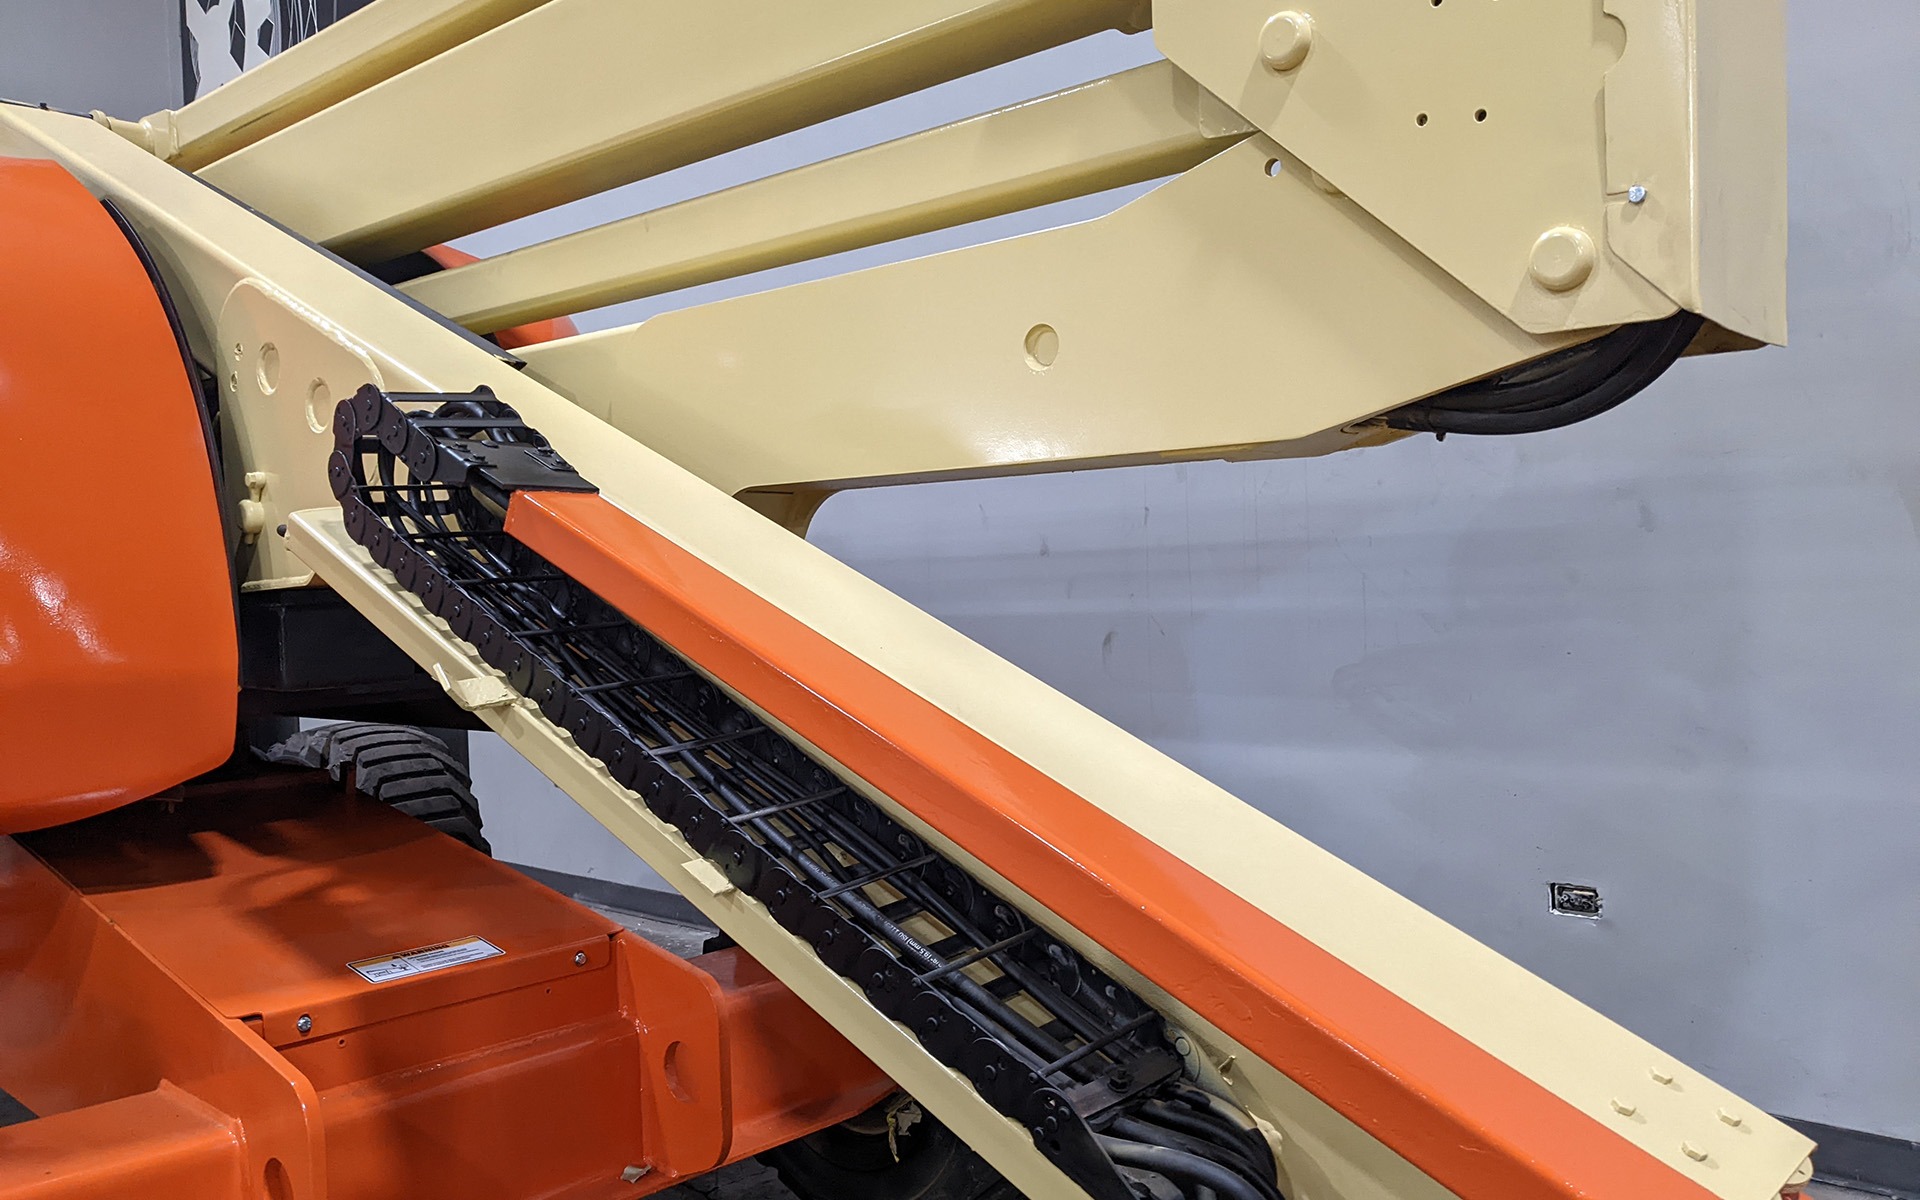 Used 2012 JLG 450A  | Cary, IL